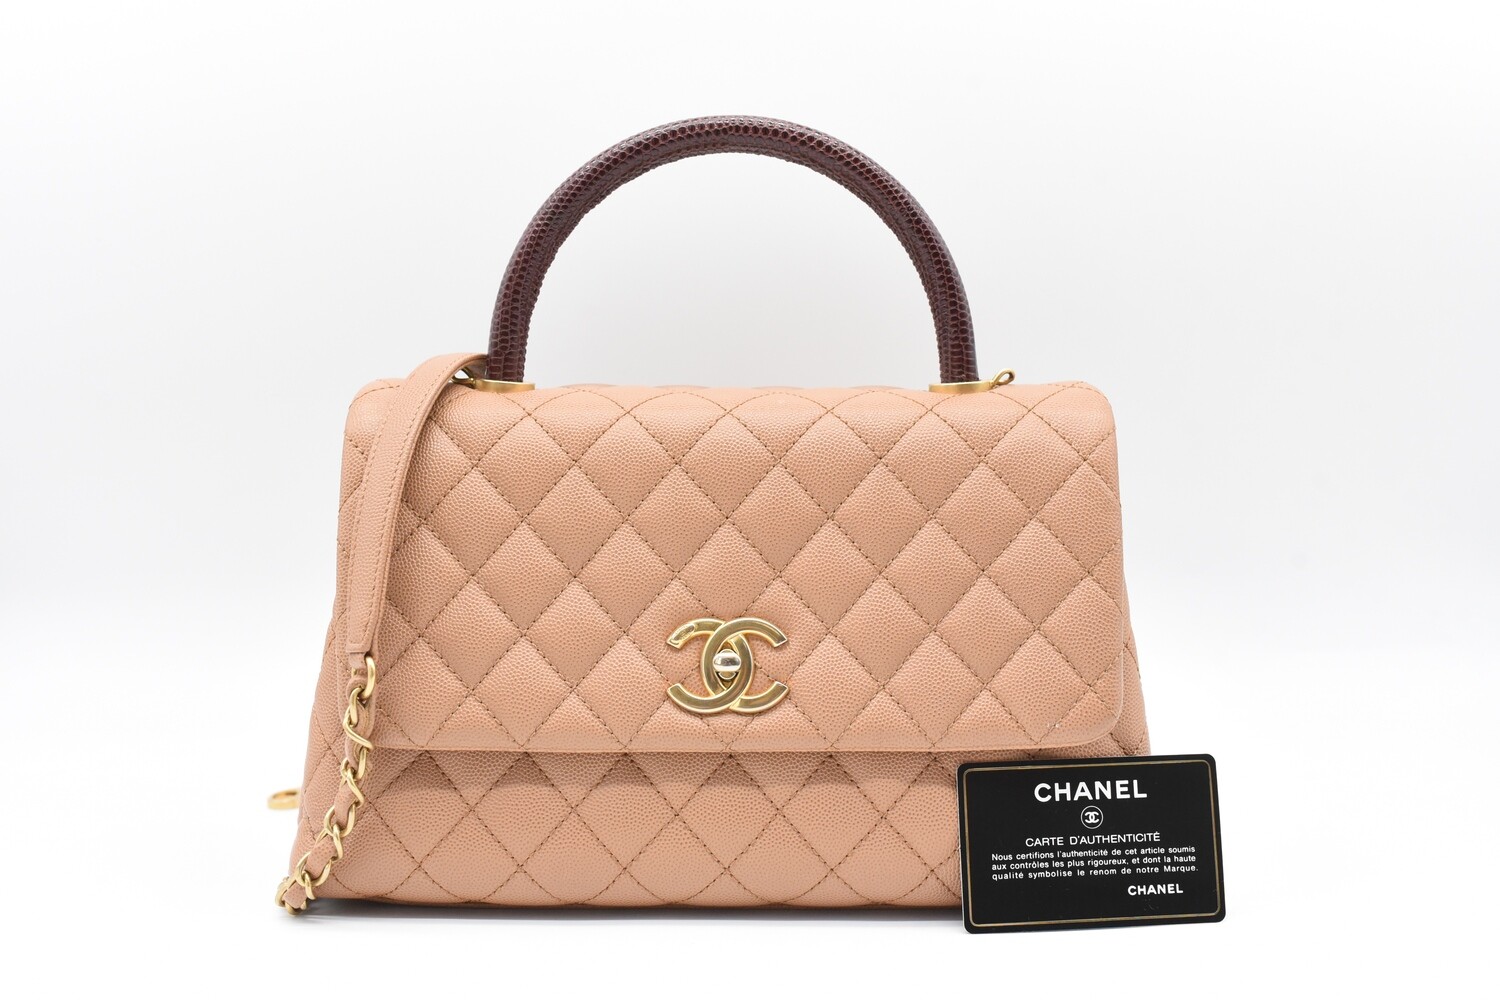 Chanel Coco Handle Small, Caramel Caviar Leather with Lizard